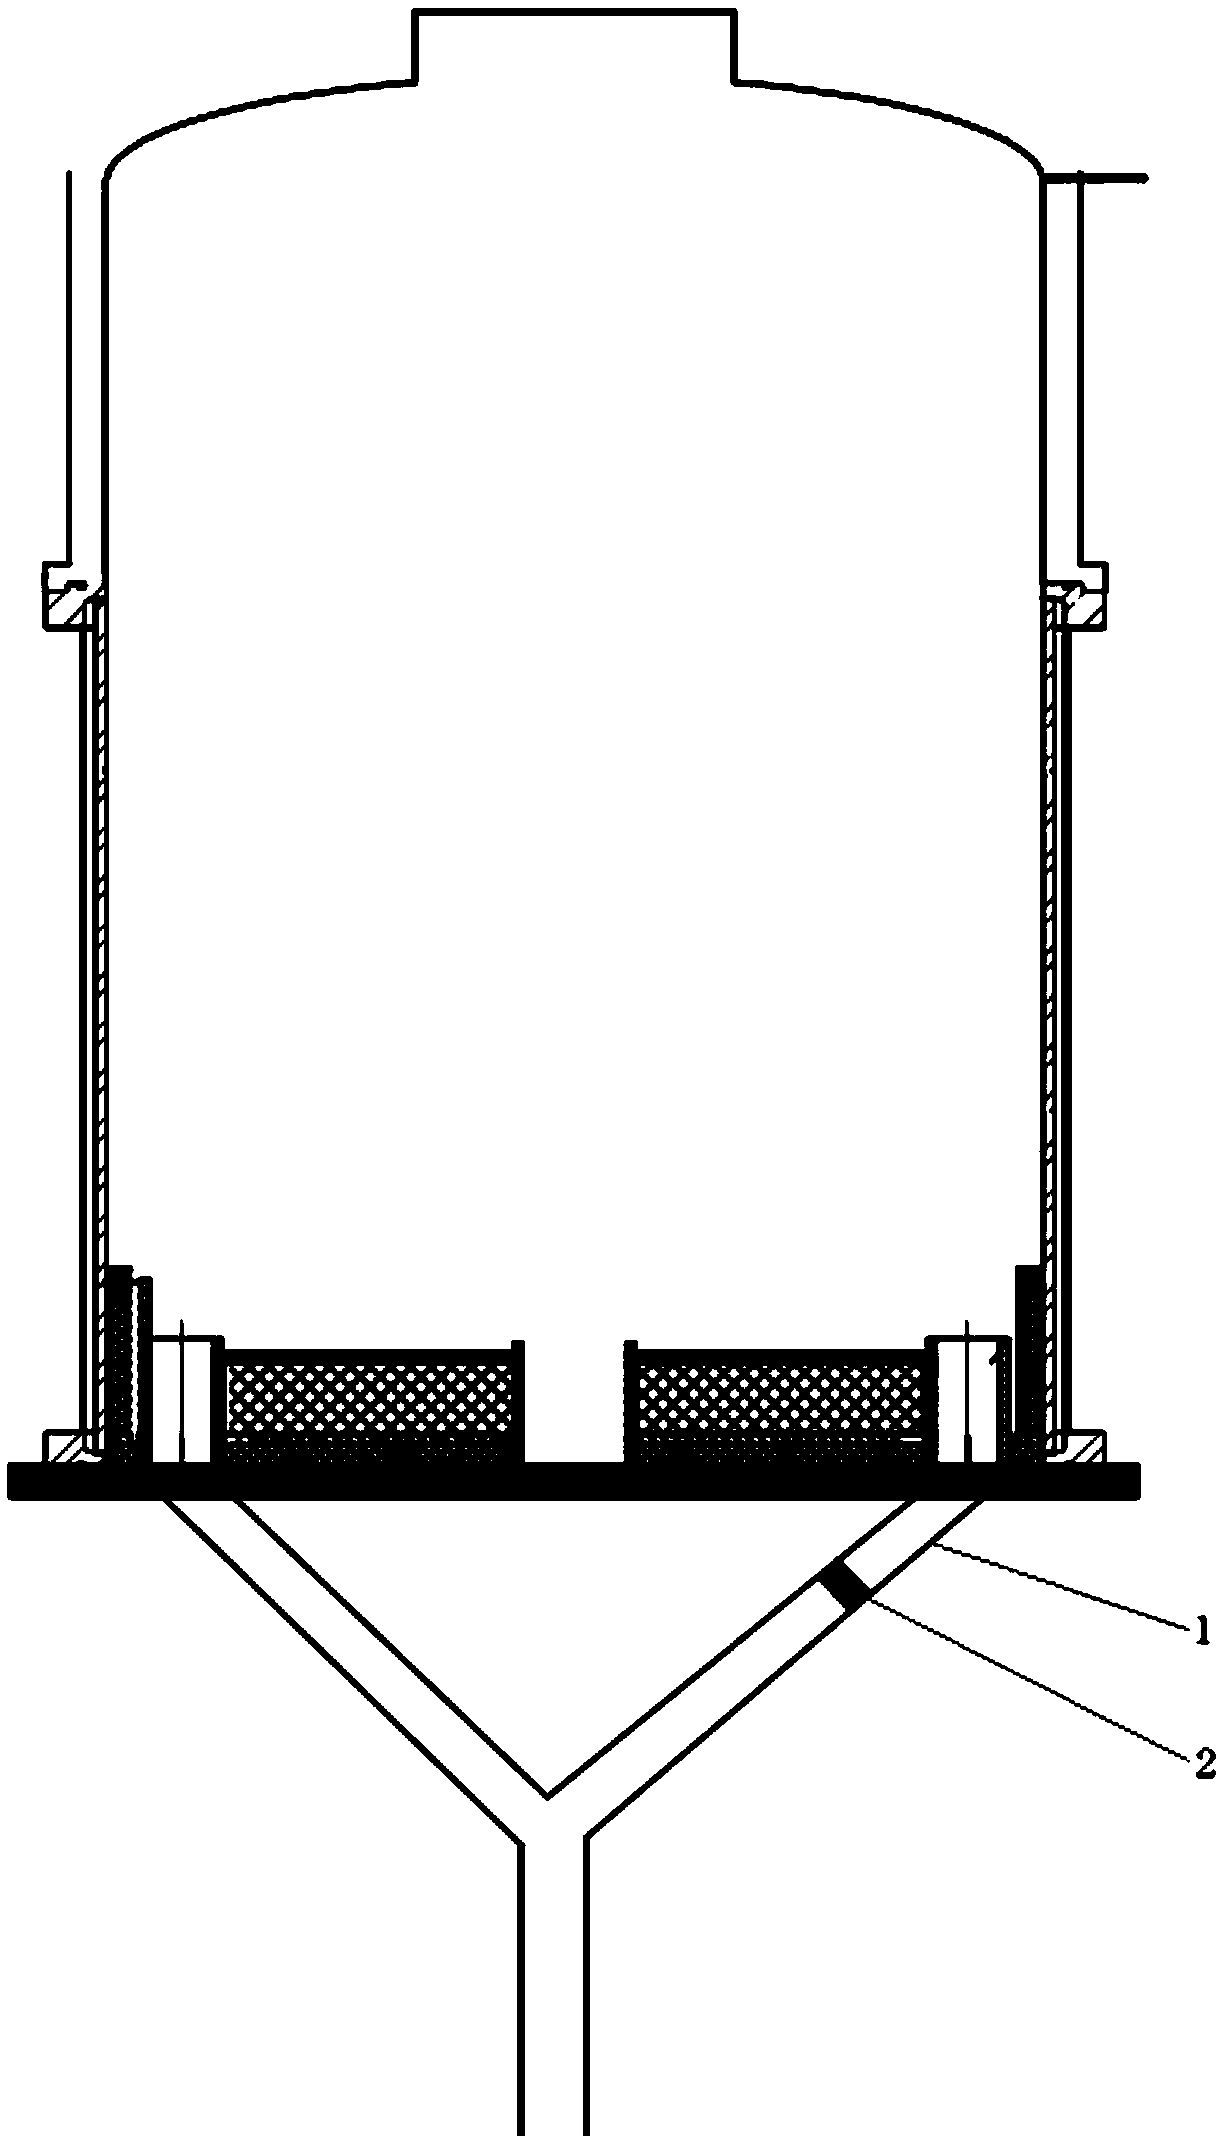 Self-purifying device for exhaust port of single-crystal furnace